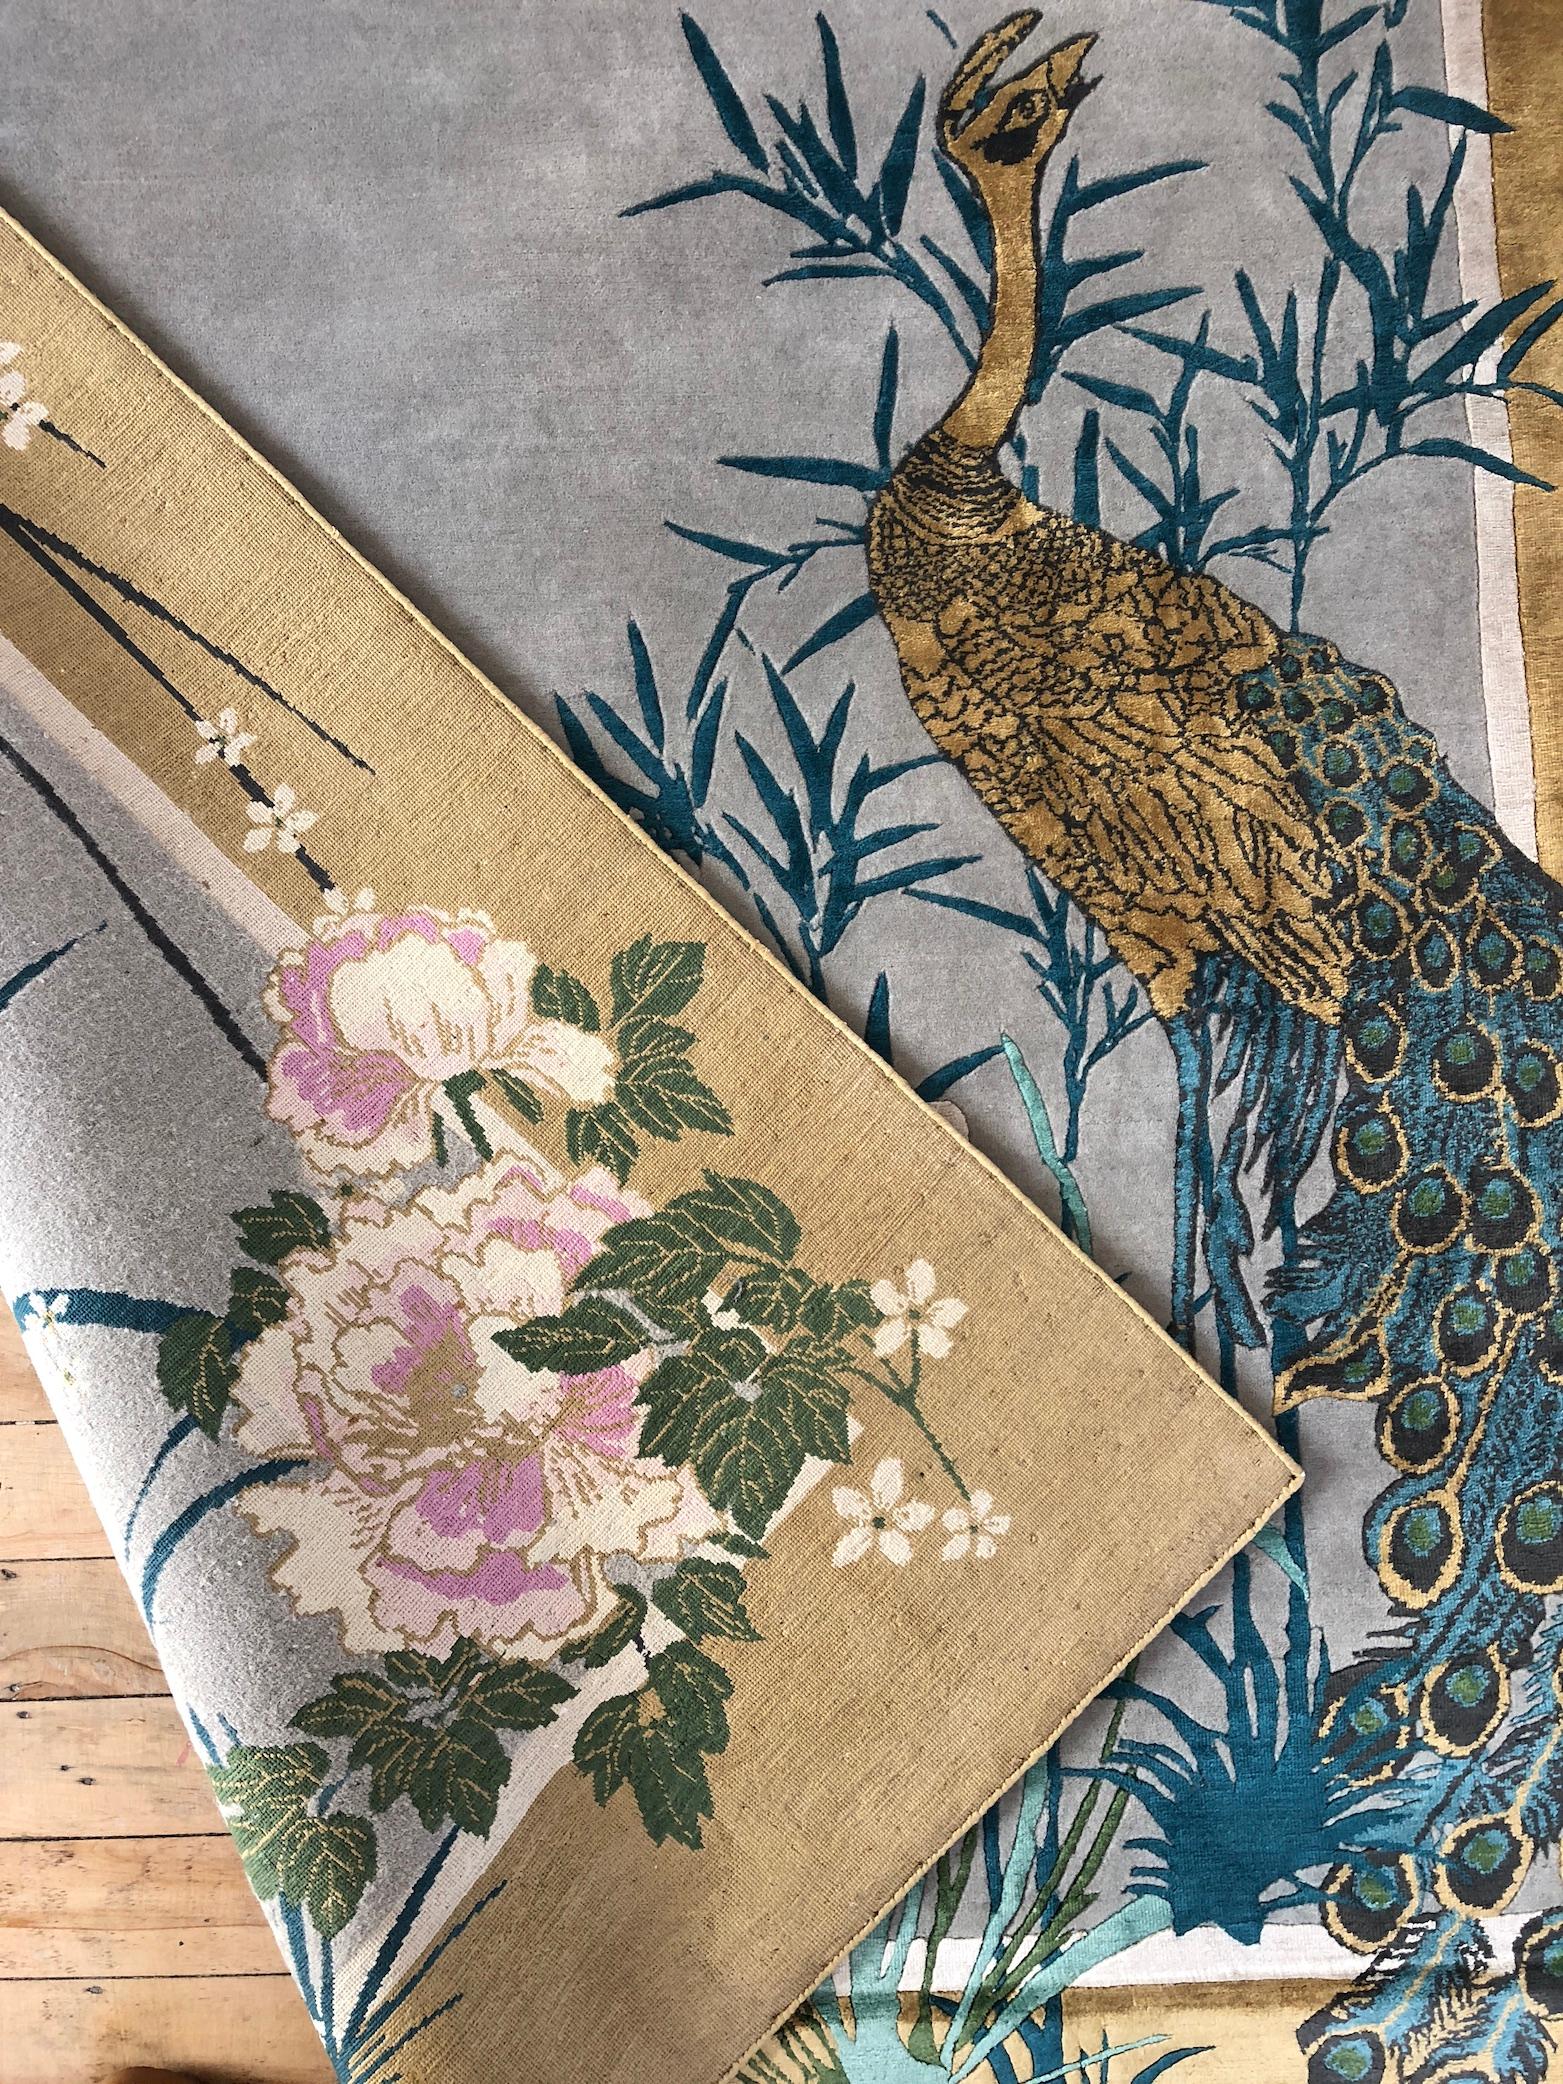 Chinese garden is a hand knotted wool and silk rug by Scottish designer Wendy Morrison. The rug is handcrafted in India using only the finest wool and silk and is Goodweave certified, meaning you can be confident that no child labour has been used